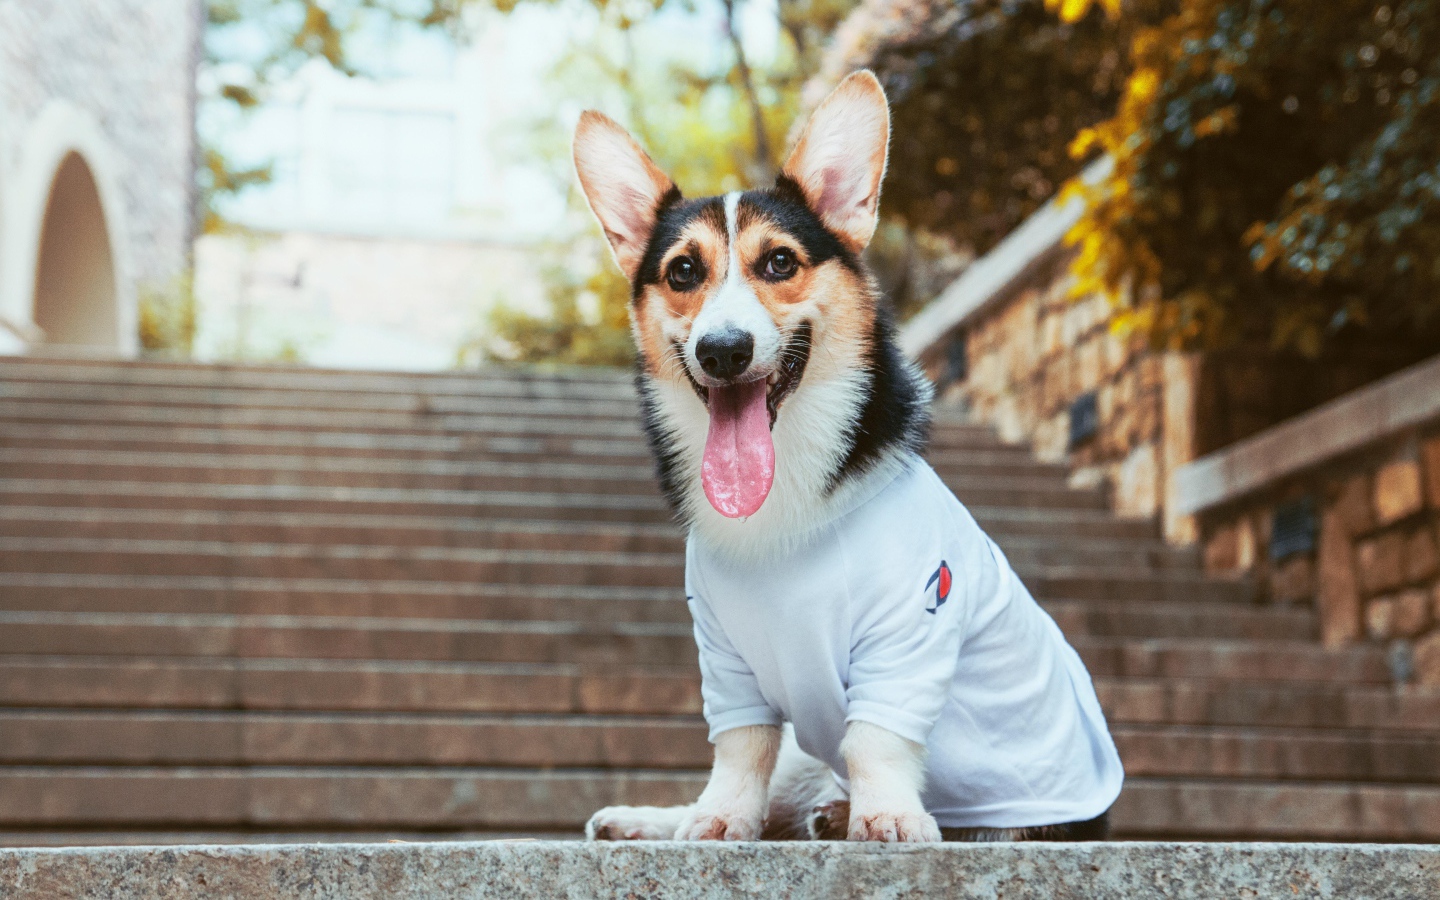 Welsh Corgi with tongue hanging out sits on the steps